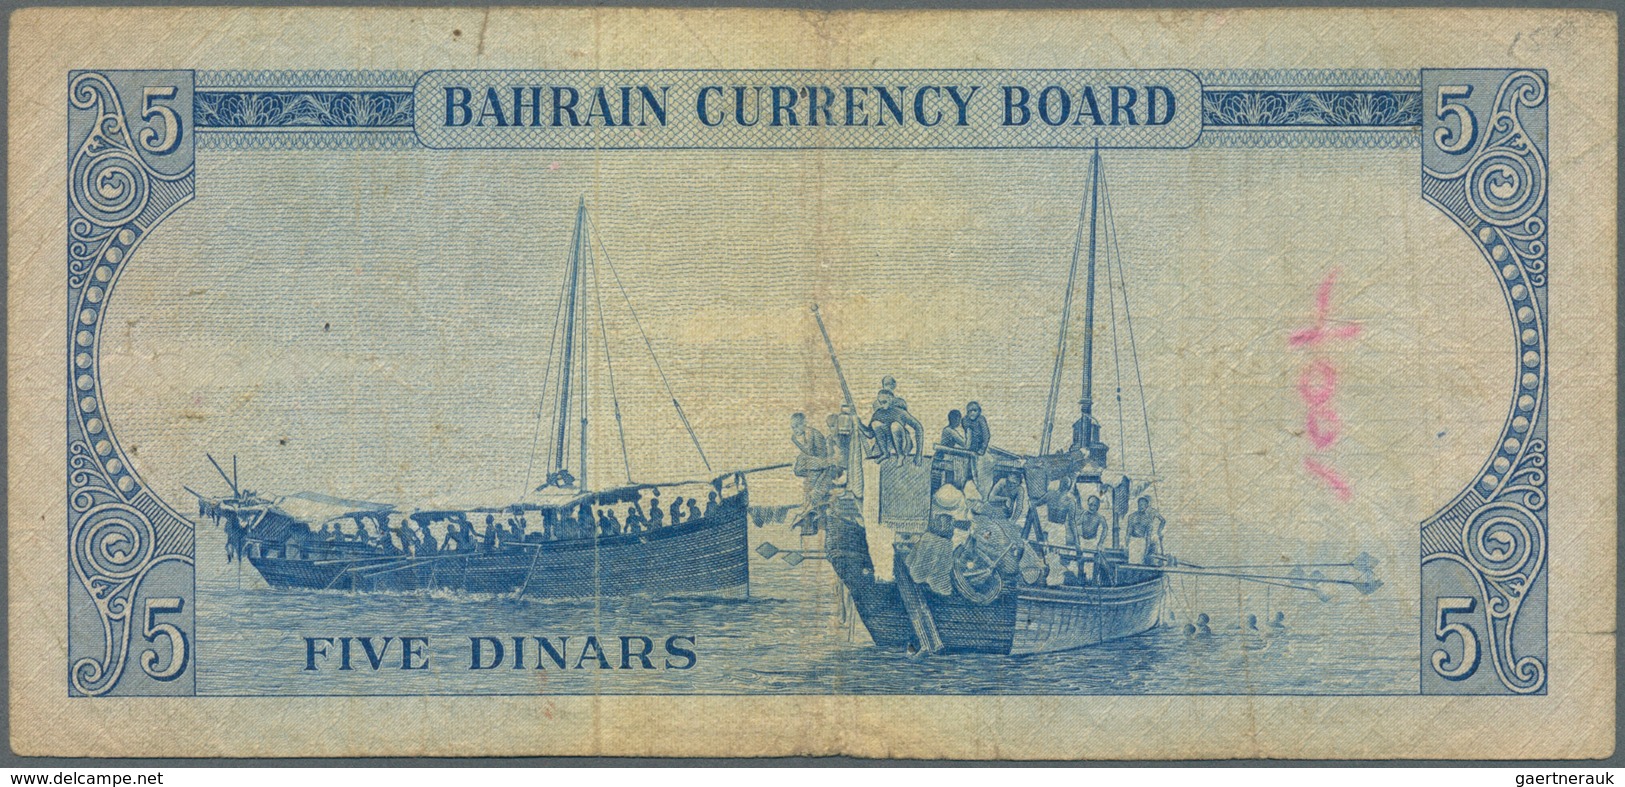 01106 Bahrain: 5 Dinars L.1964 P. 5 In Used Condition With Small Ink Writing At Left, Folds And Creases, L - Bahrein